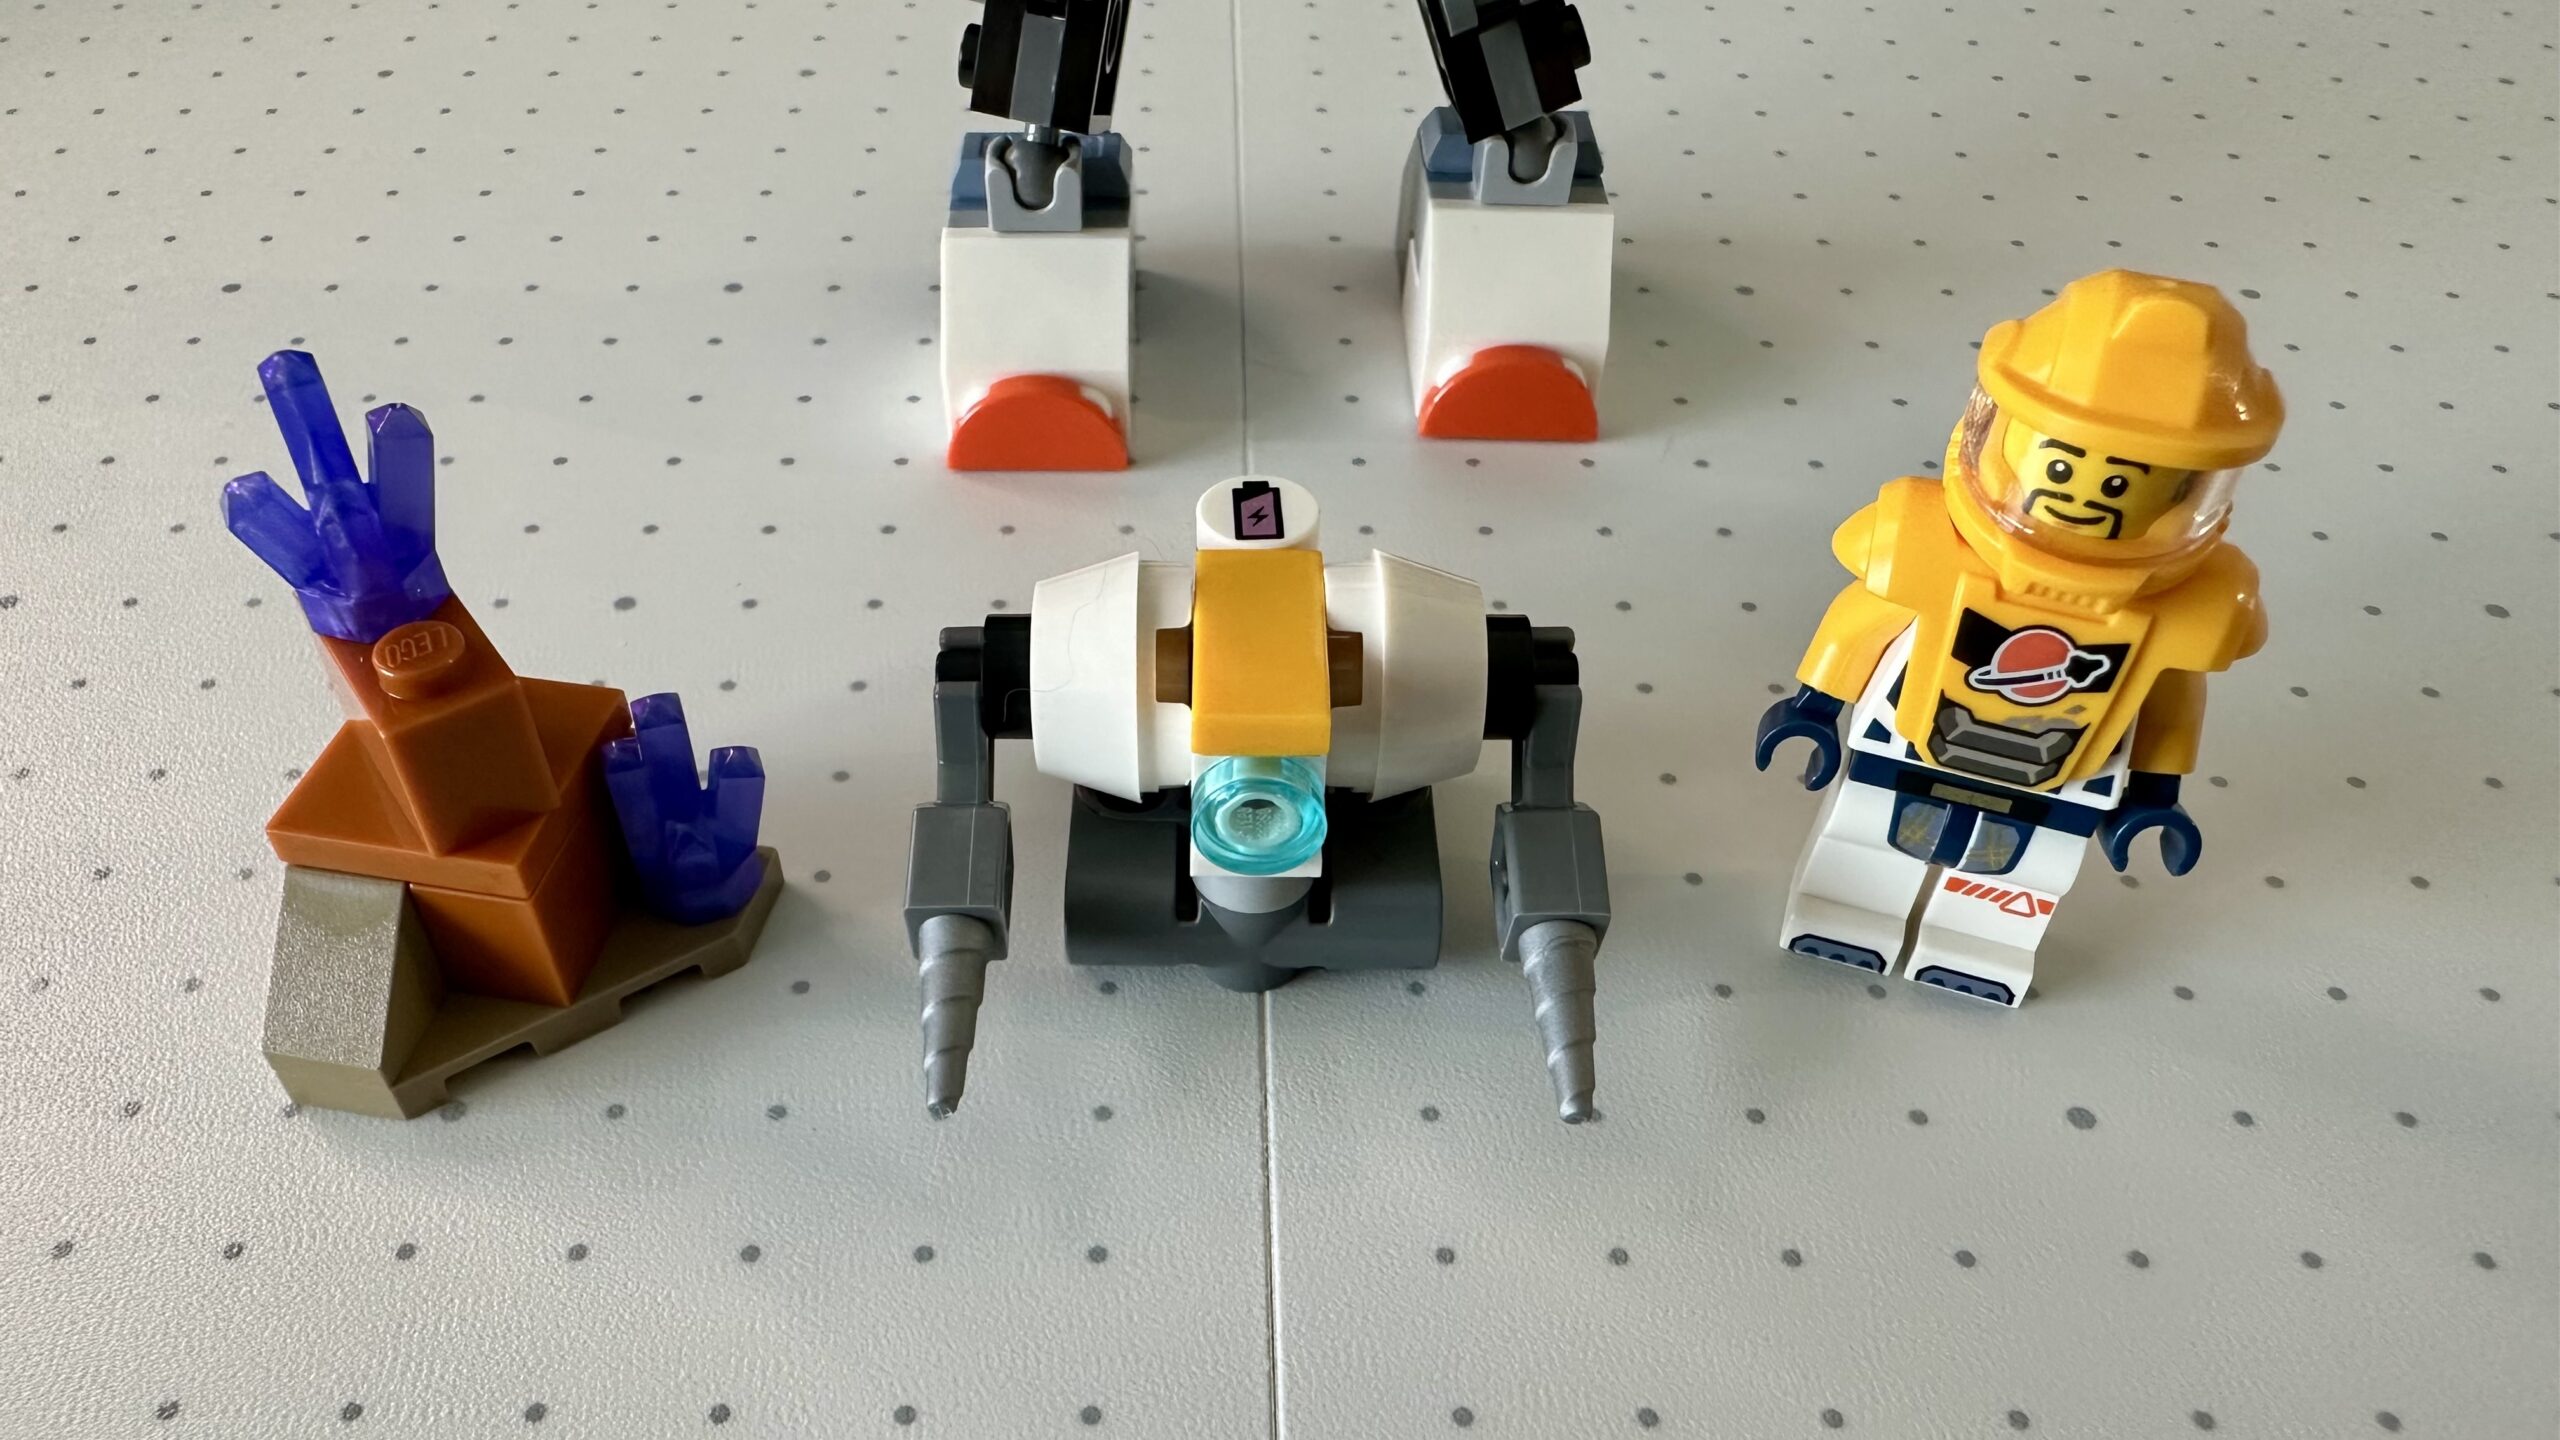 Close up of some LEGO. From left to right: a small section of alien terrain with purple crystals, a small mining robot with drill arms, and an astronaut in yellowish-orange armor.